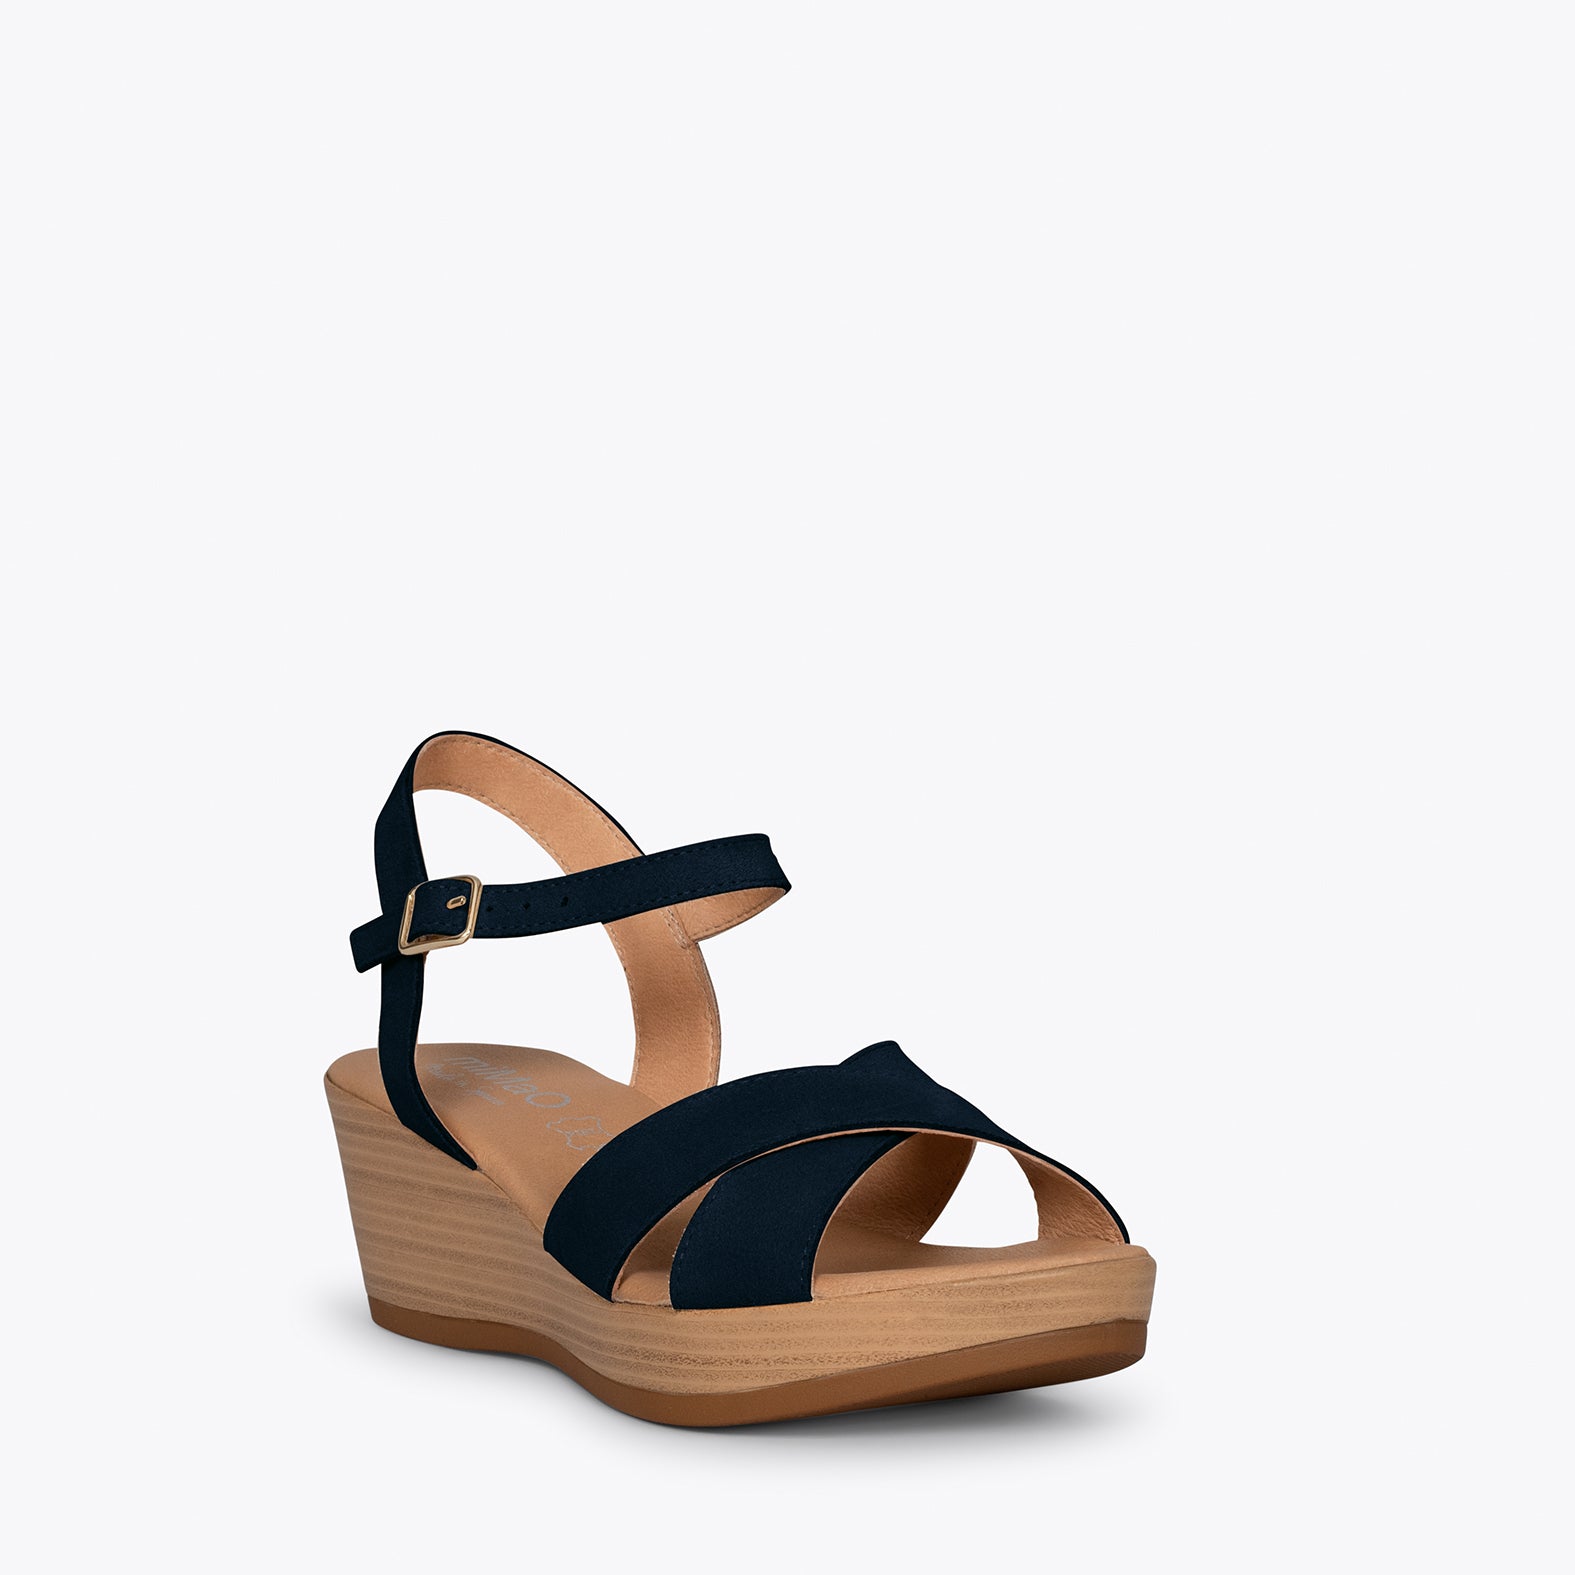 SEA- NAVY comfortable sandal with wedge